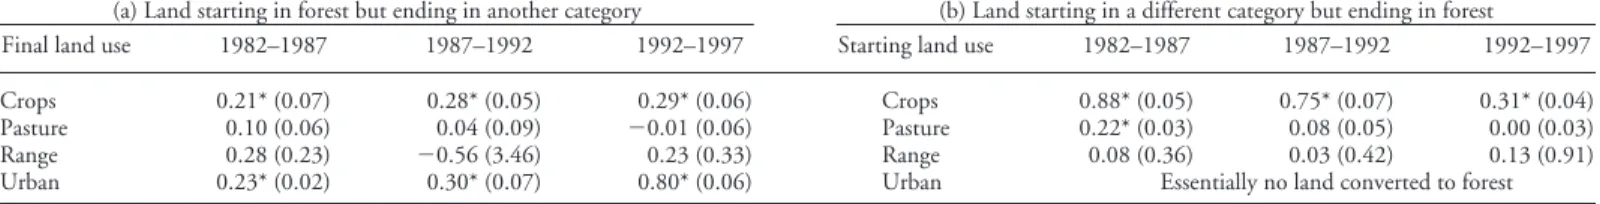 Table 2. Despite the large increases in harvesting, carbon stocks on private softwood timberland in the US South have remained essentially constant, due to expanded acreage of planted pine and improved management practices.